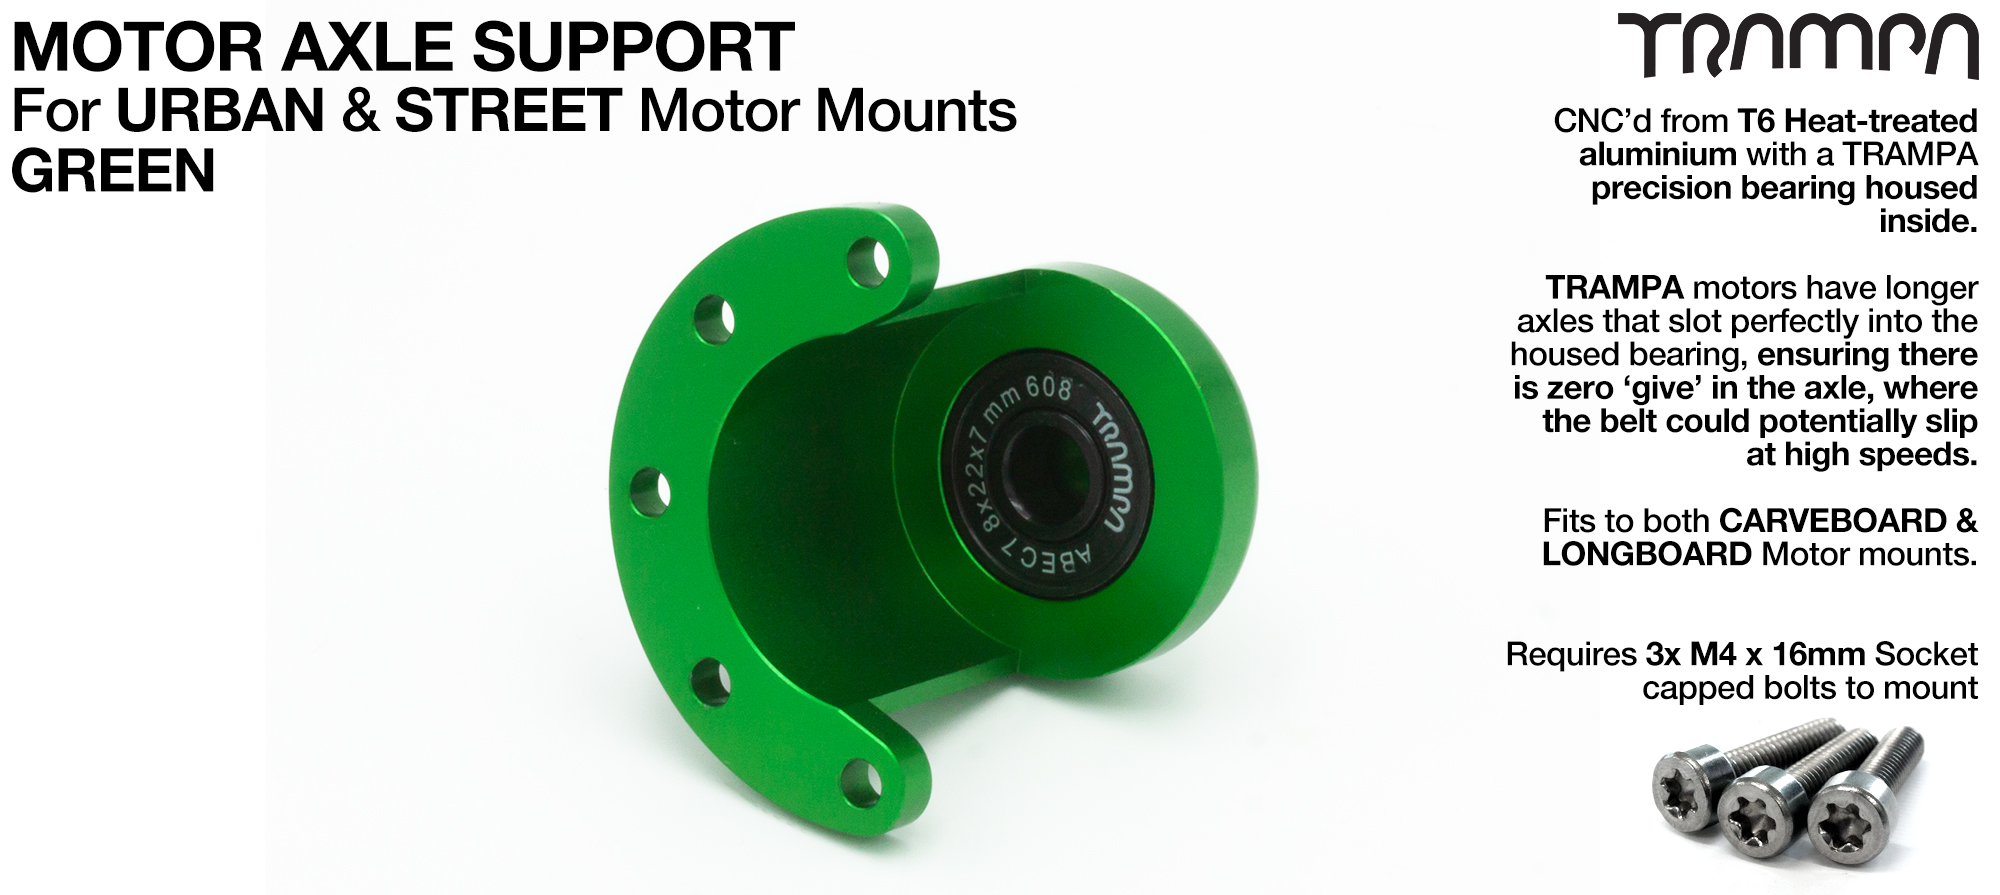 Motor Axle Support Housing with TRAMPA R608 8x22x7mm Bearing, C-Clip & Stainless Steel fixing Bolts for ORRSOM Longboard Motor Mounts  - GREEN